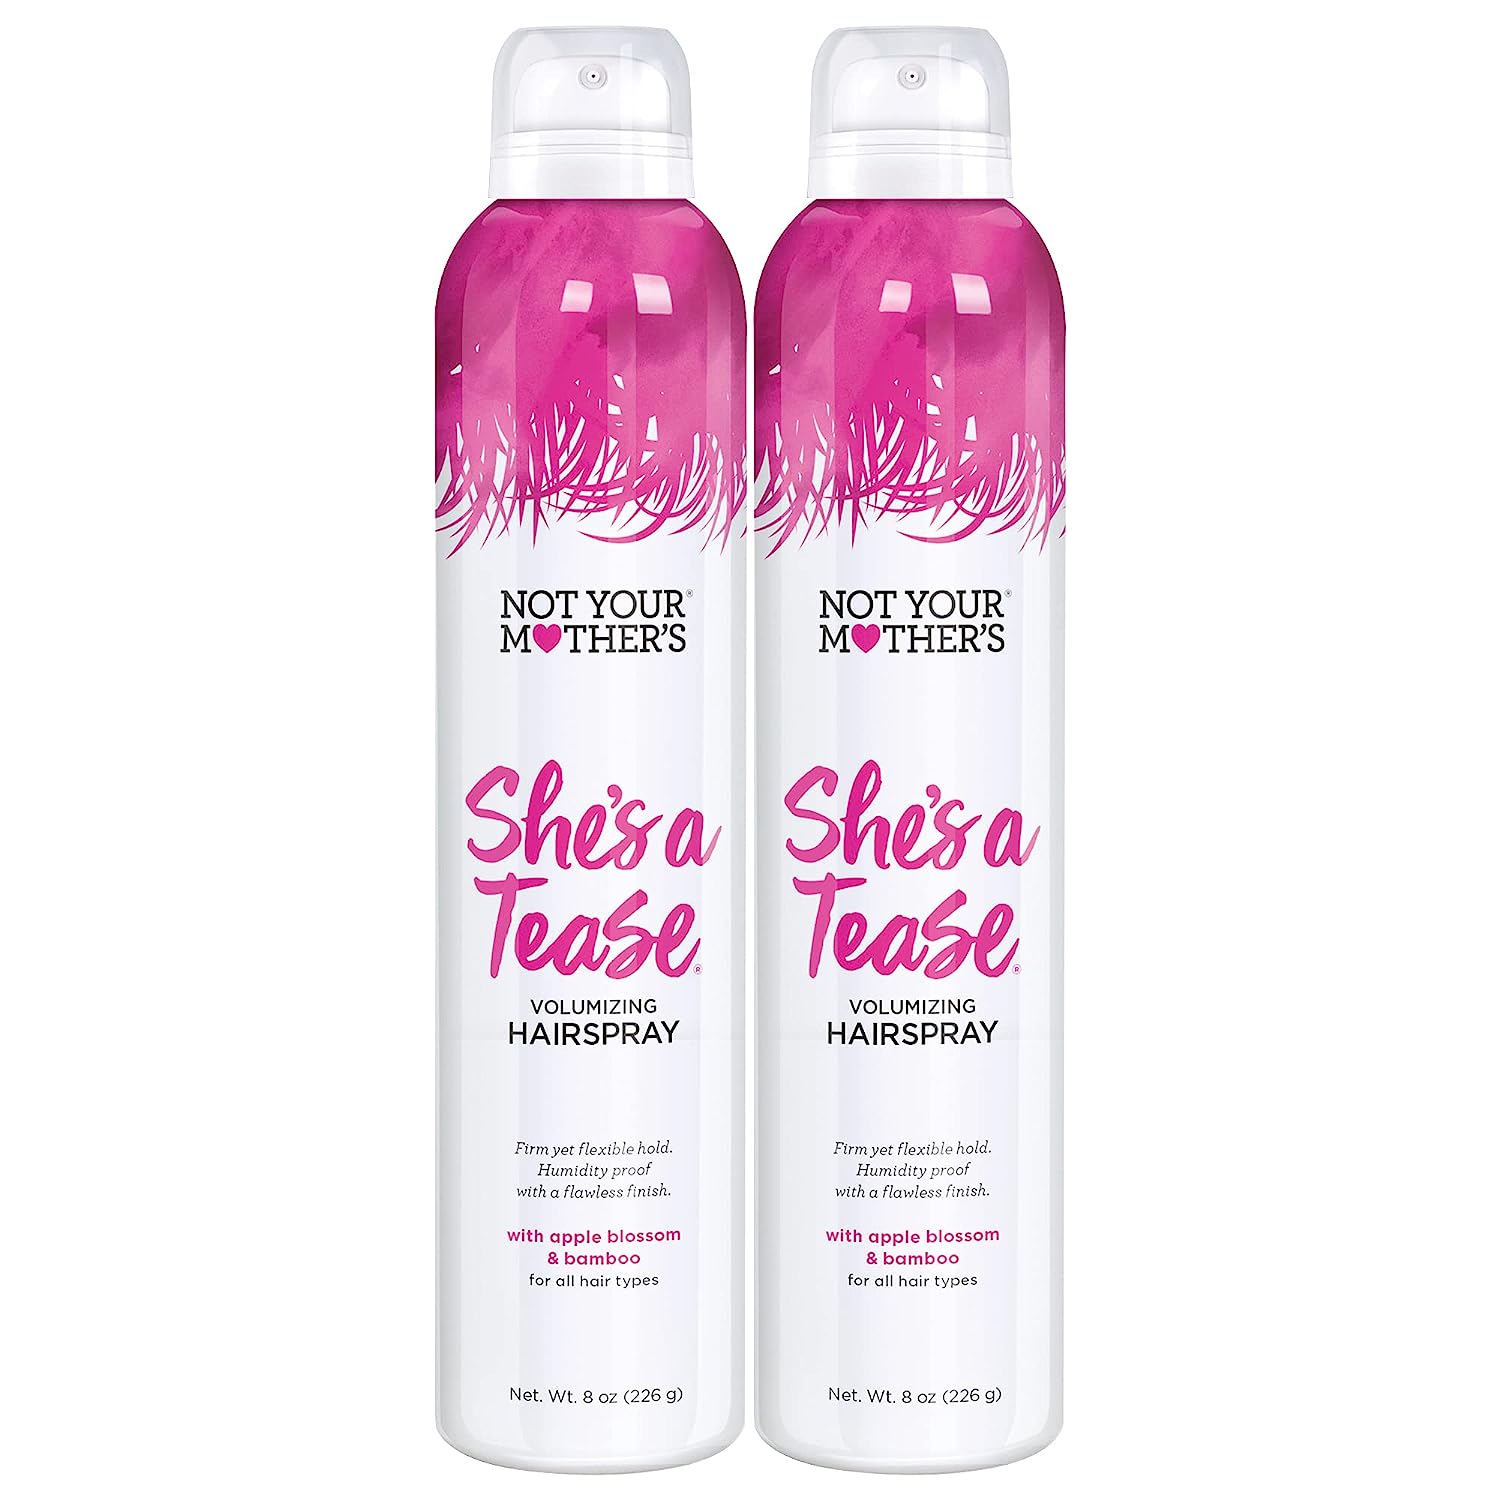 Not Your Mother's She's a Tease Hairspray (2-Pack) - 8 [...]